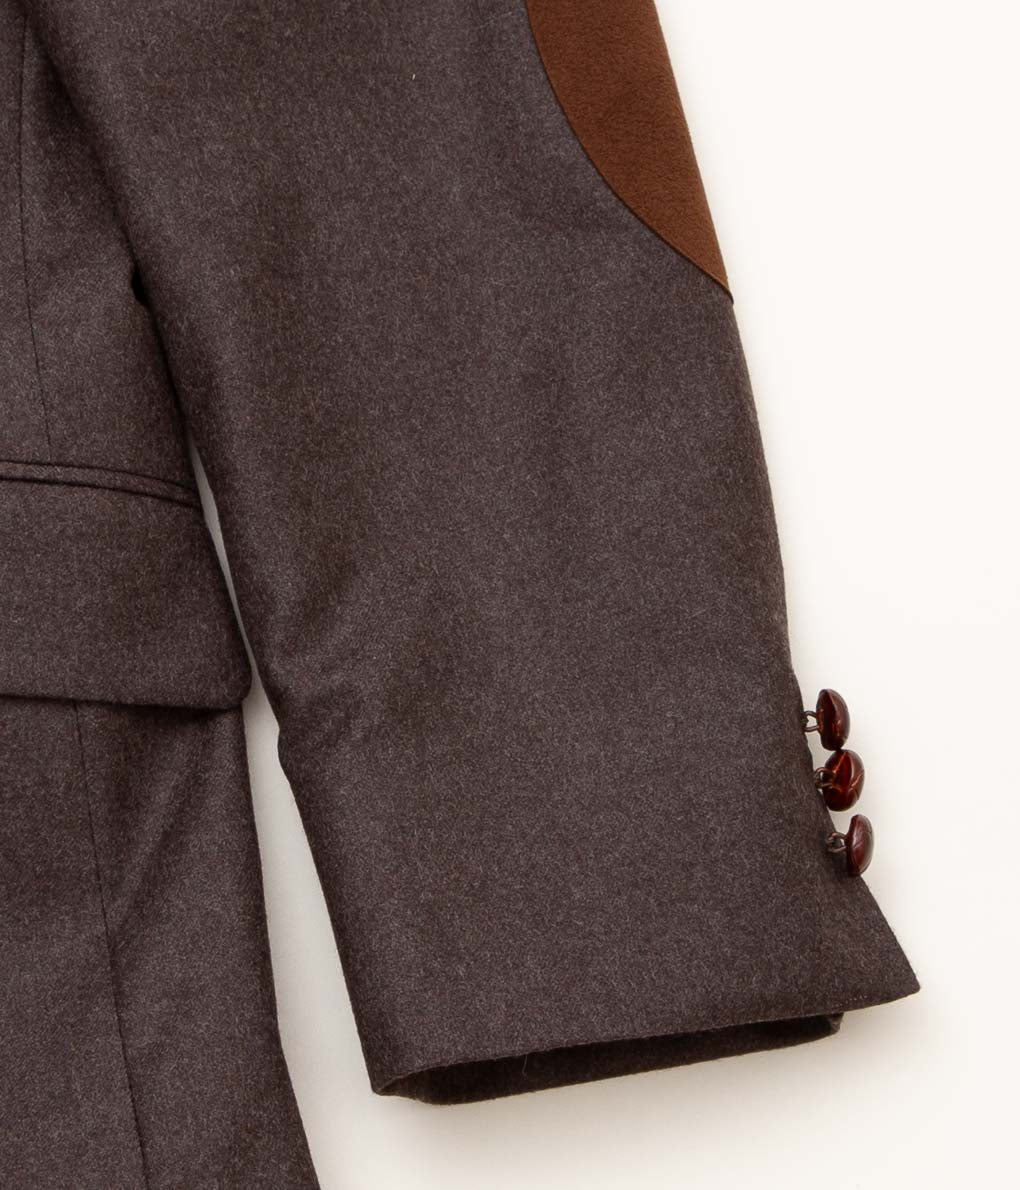 INDIVIDUALIZED CLOTHING "COUNTRY BLAZER"(BROWN)